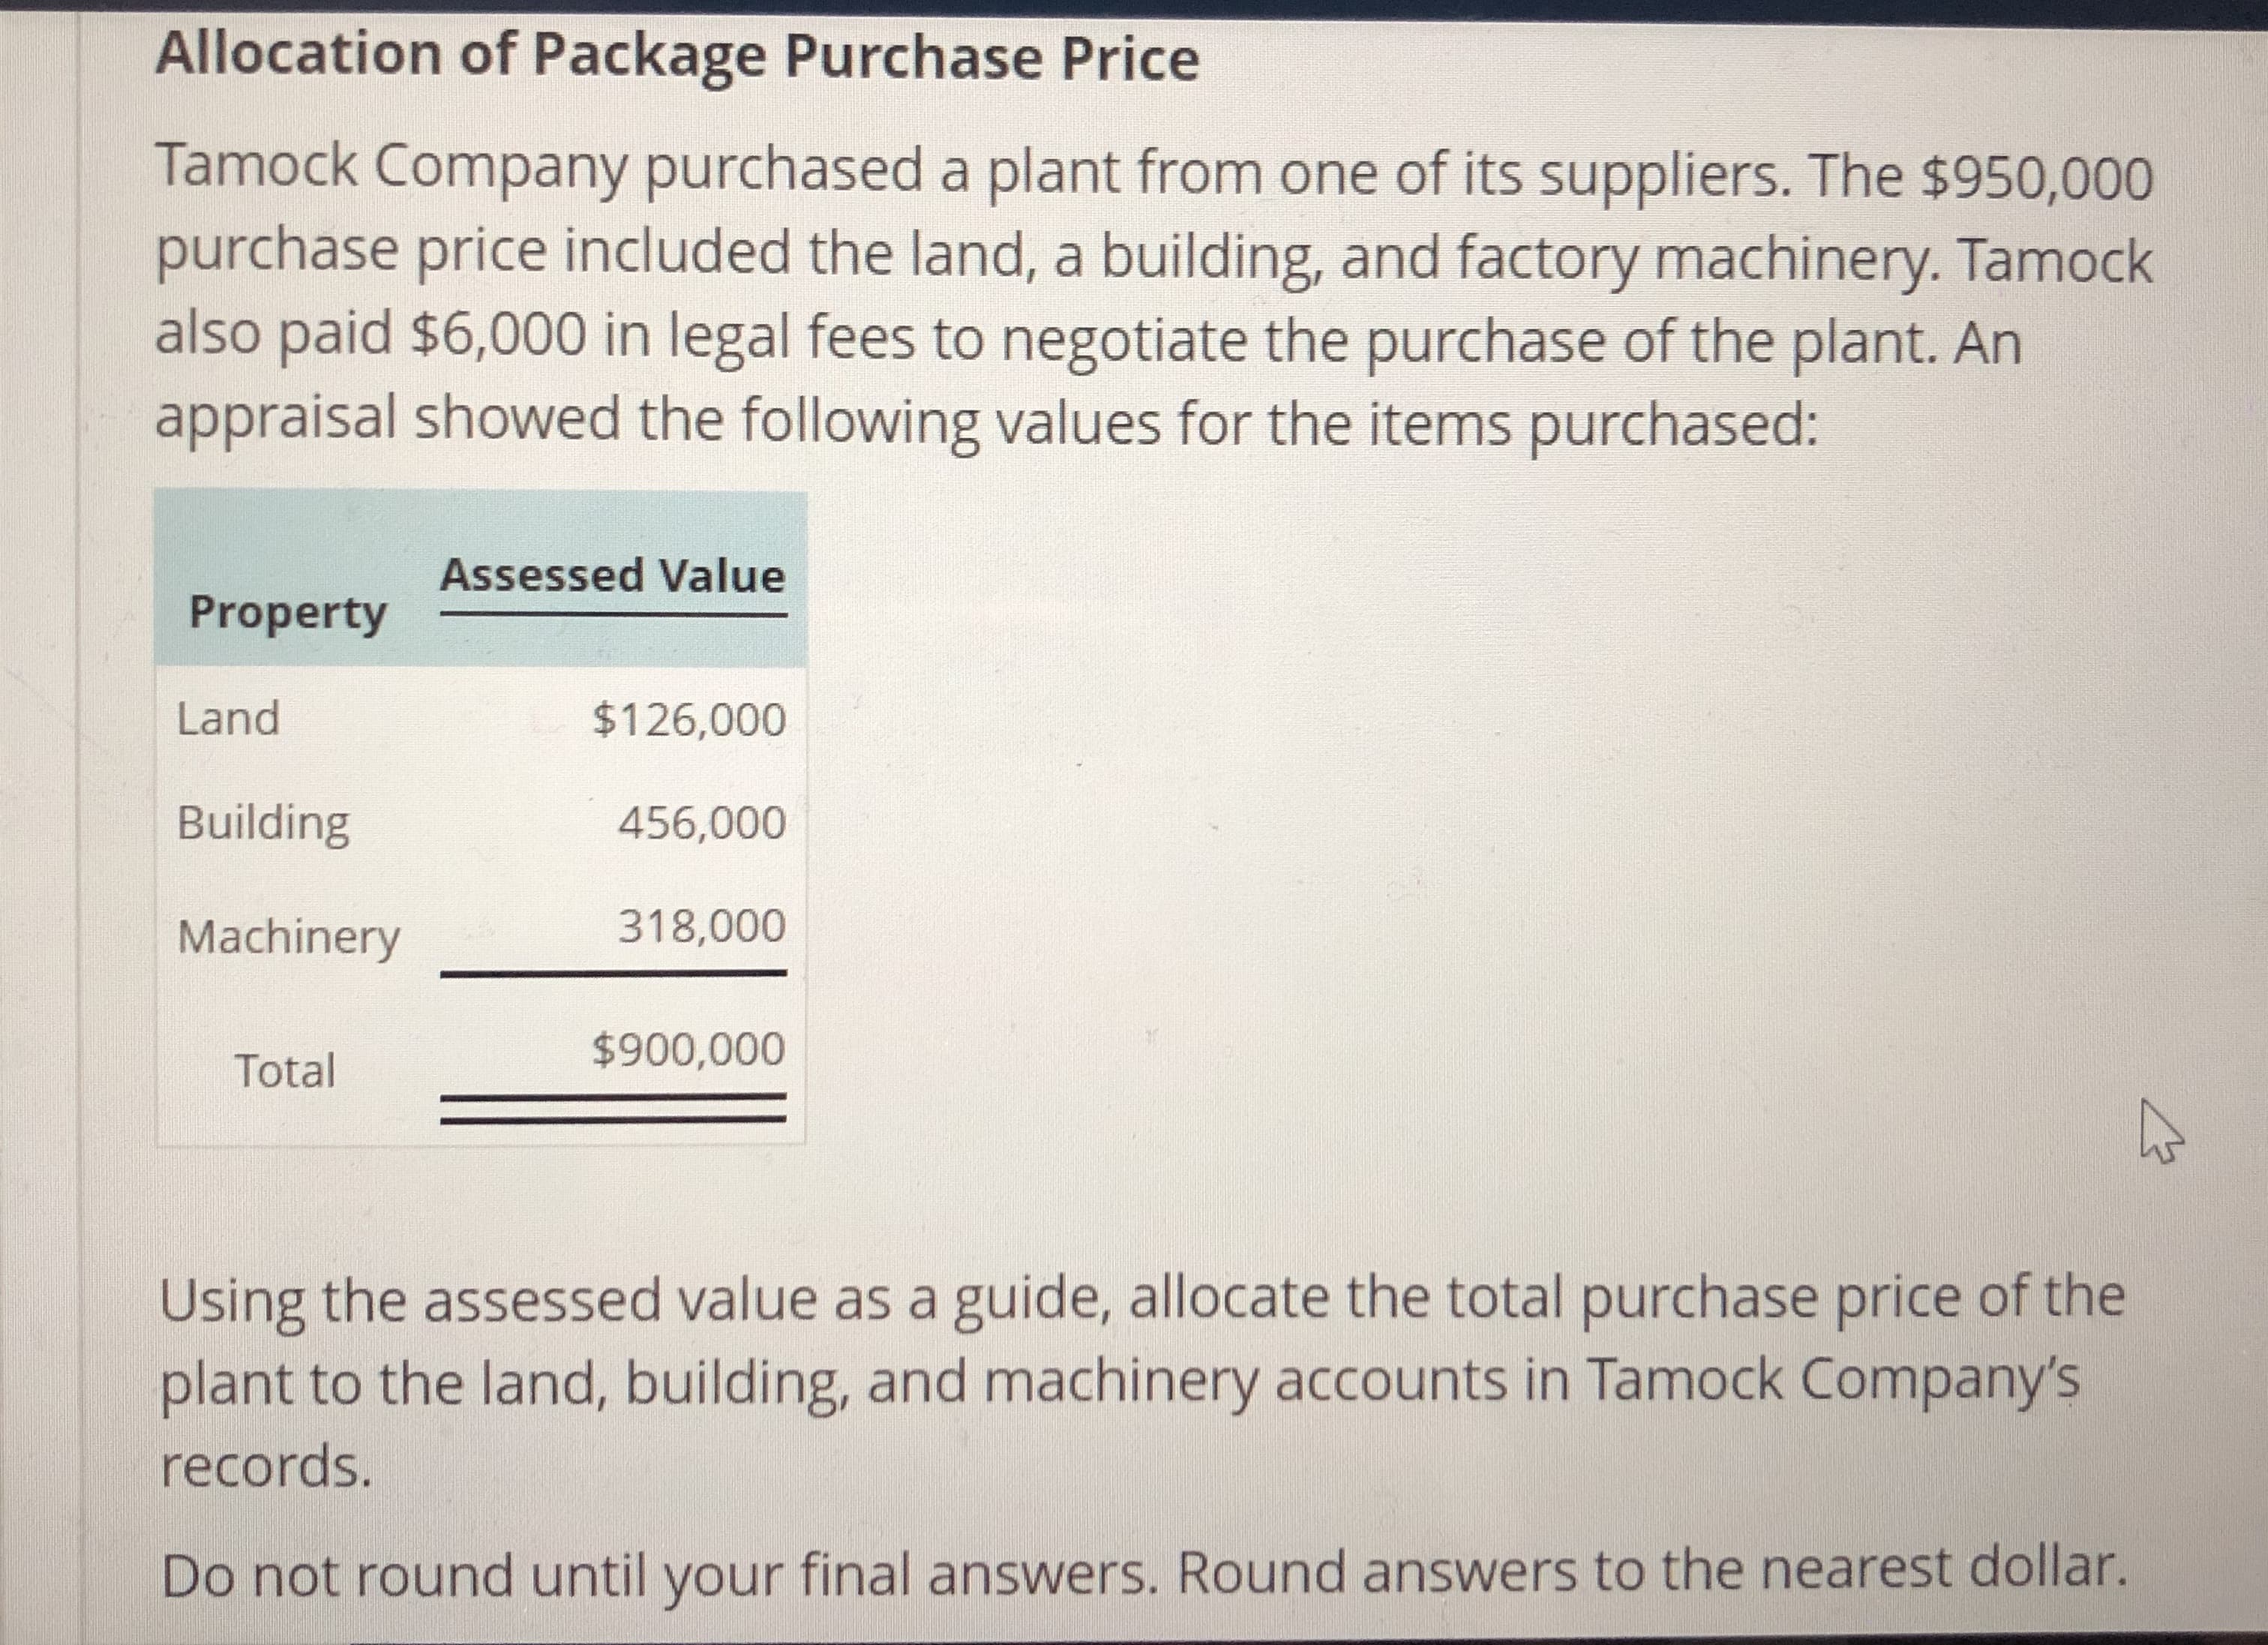 Allocation of Package Purchase Price
Tamock Company purchased a plant from one of its suppliers. The $950,000
purchase price included the land, a building, and factory machinery. Tamock
also paid $6,000 in legal fees to negotiate the purchase of the plant. Arn
appraisal showed the following values for the items purchased:
Assessed Value
Property
Land
Building
Machinery318,000
$126,000
456,000
TotalF
$900,000
Using the assessed value as a guide, allocate the total purchase price of the
plant to the land, building, and machinery accounts in Tamock Company's
records.
Do not round until your final answers. Round answers to the nearest dollar.
